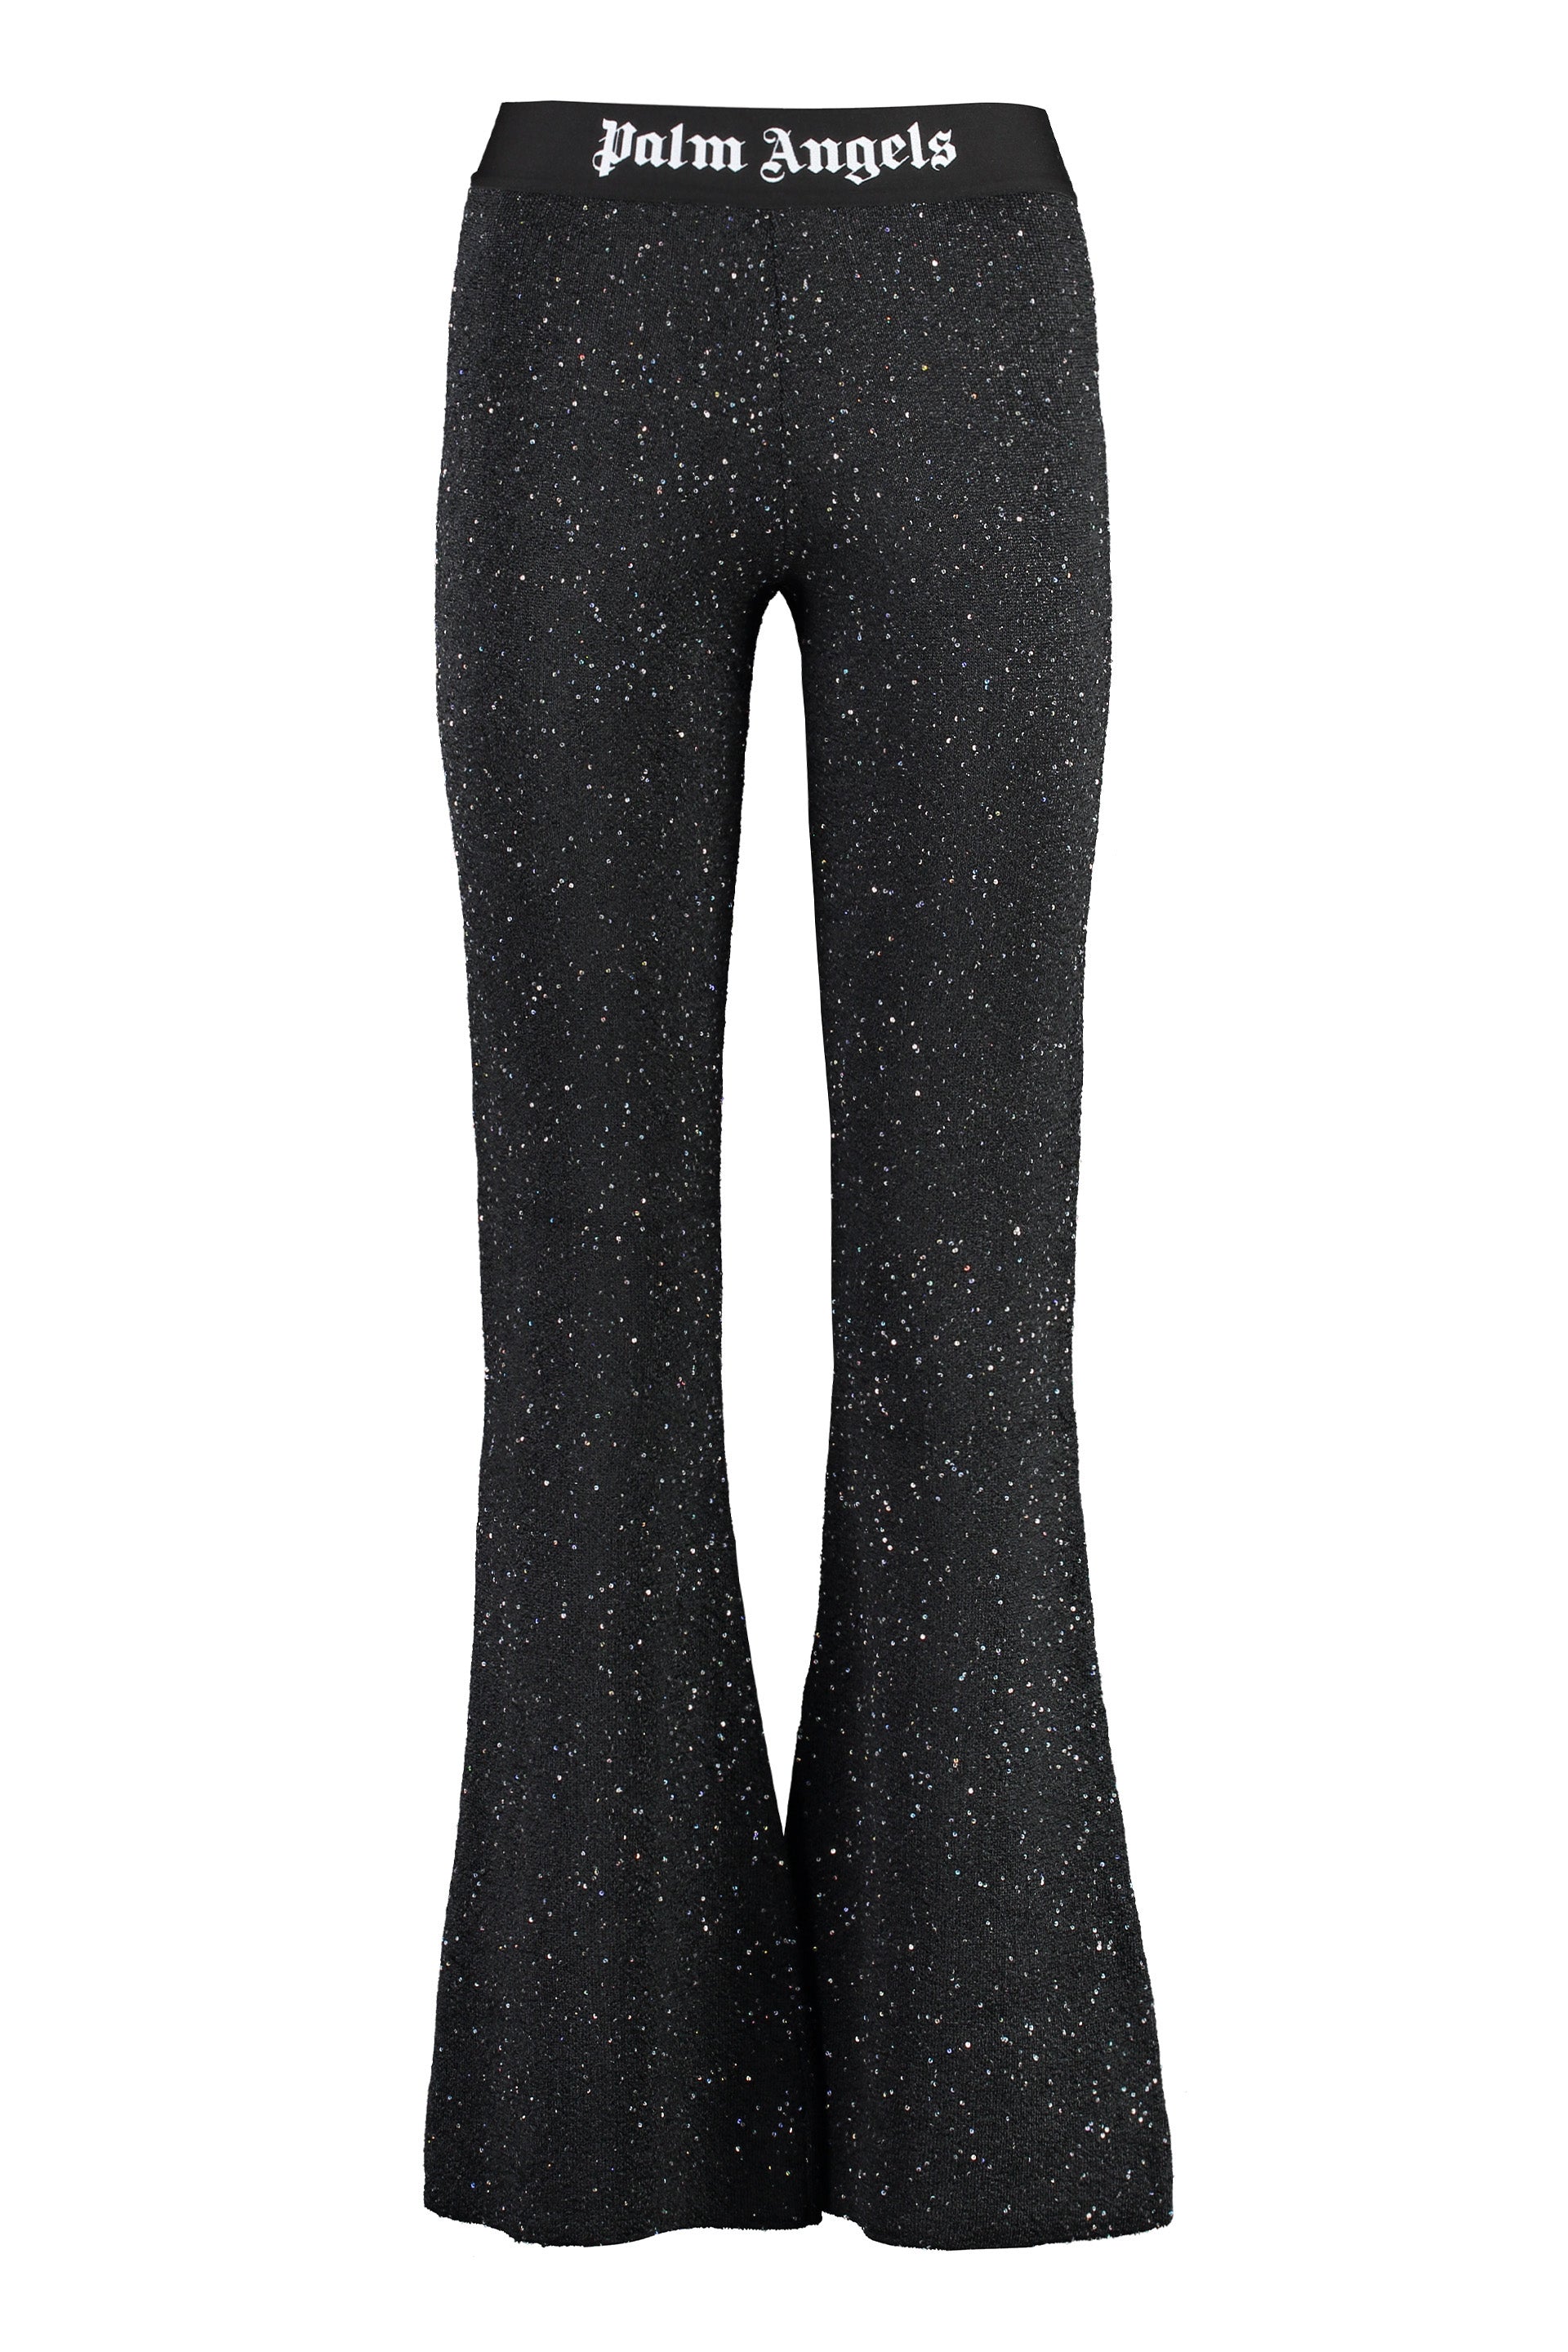 Palm Angels Black Knit Flared Trousers For Women From